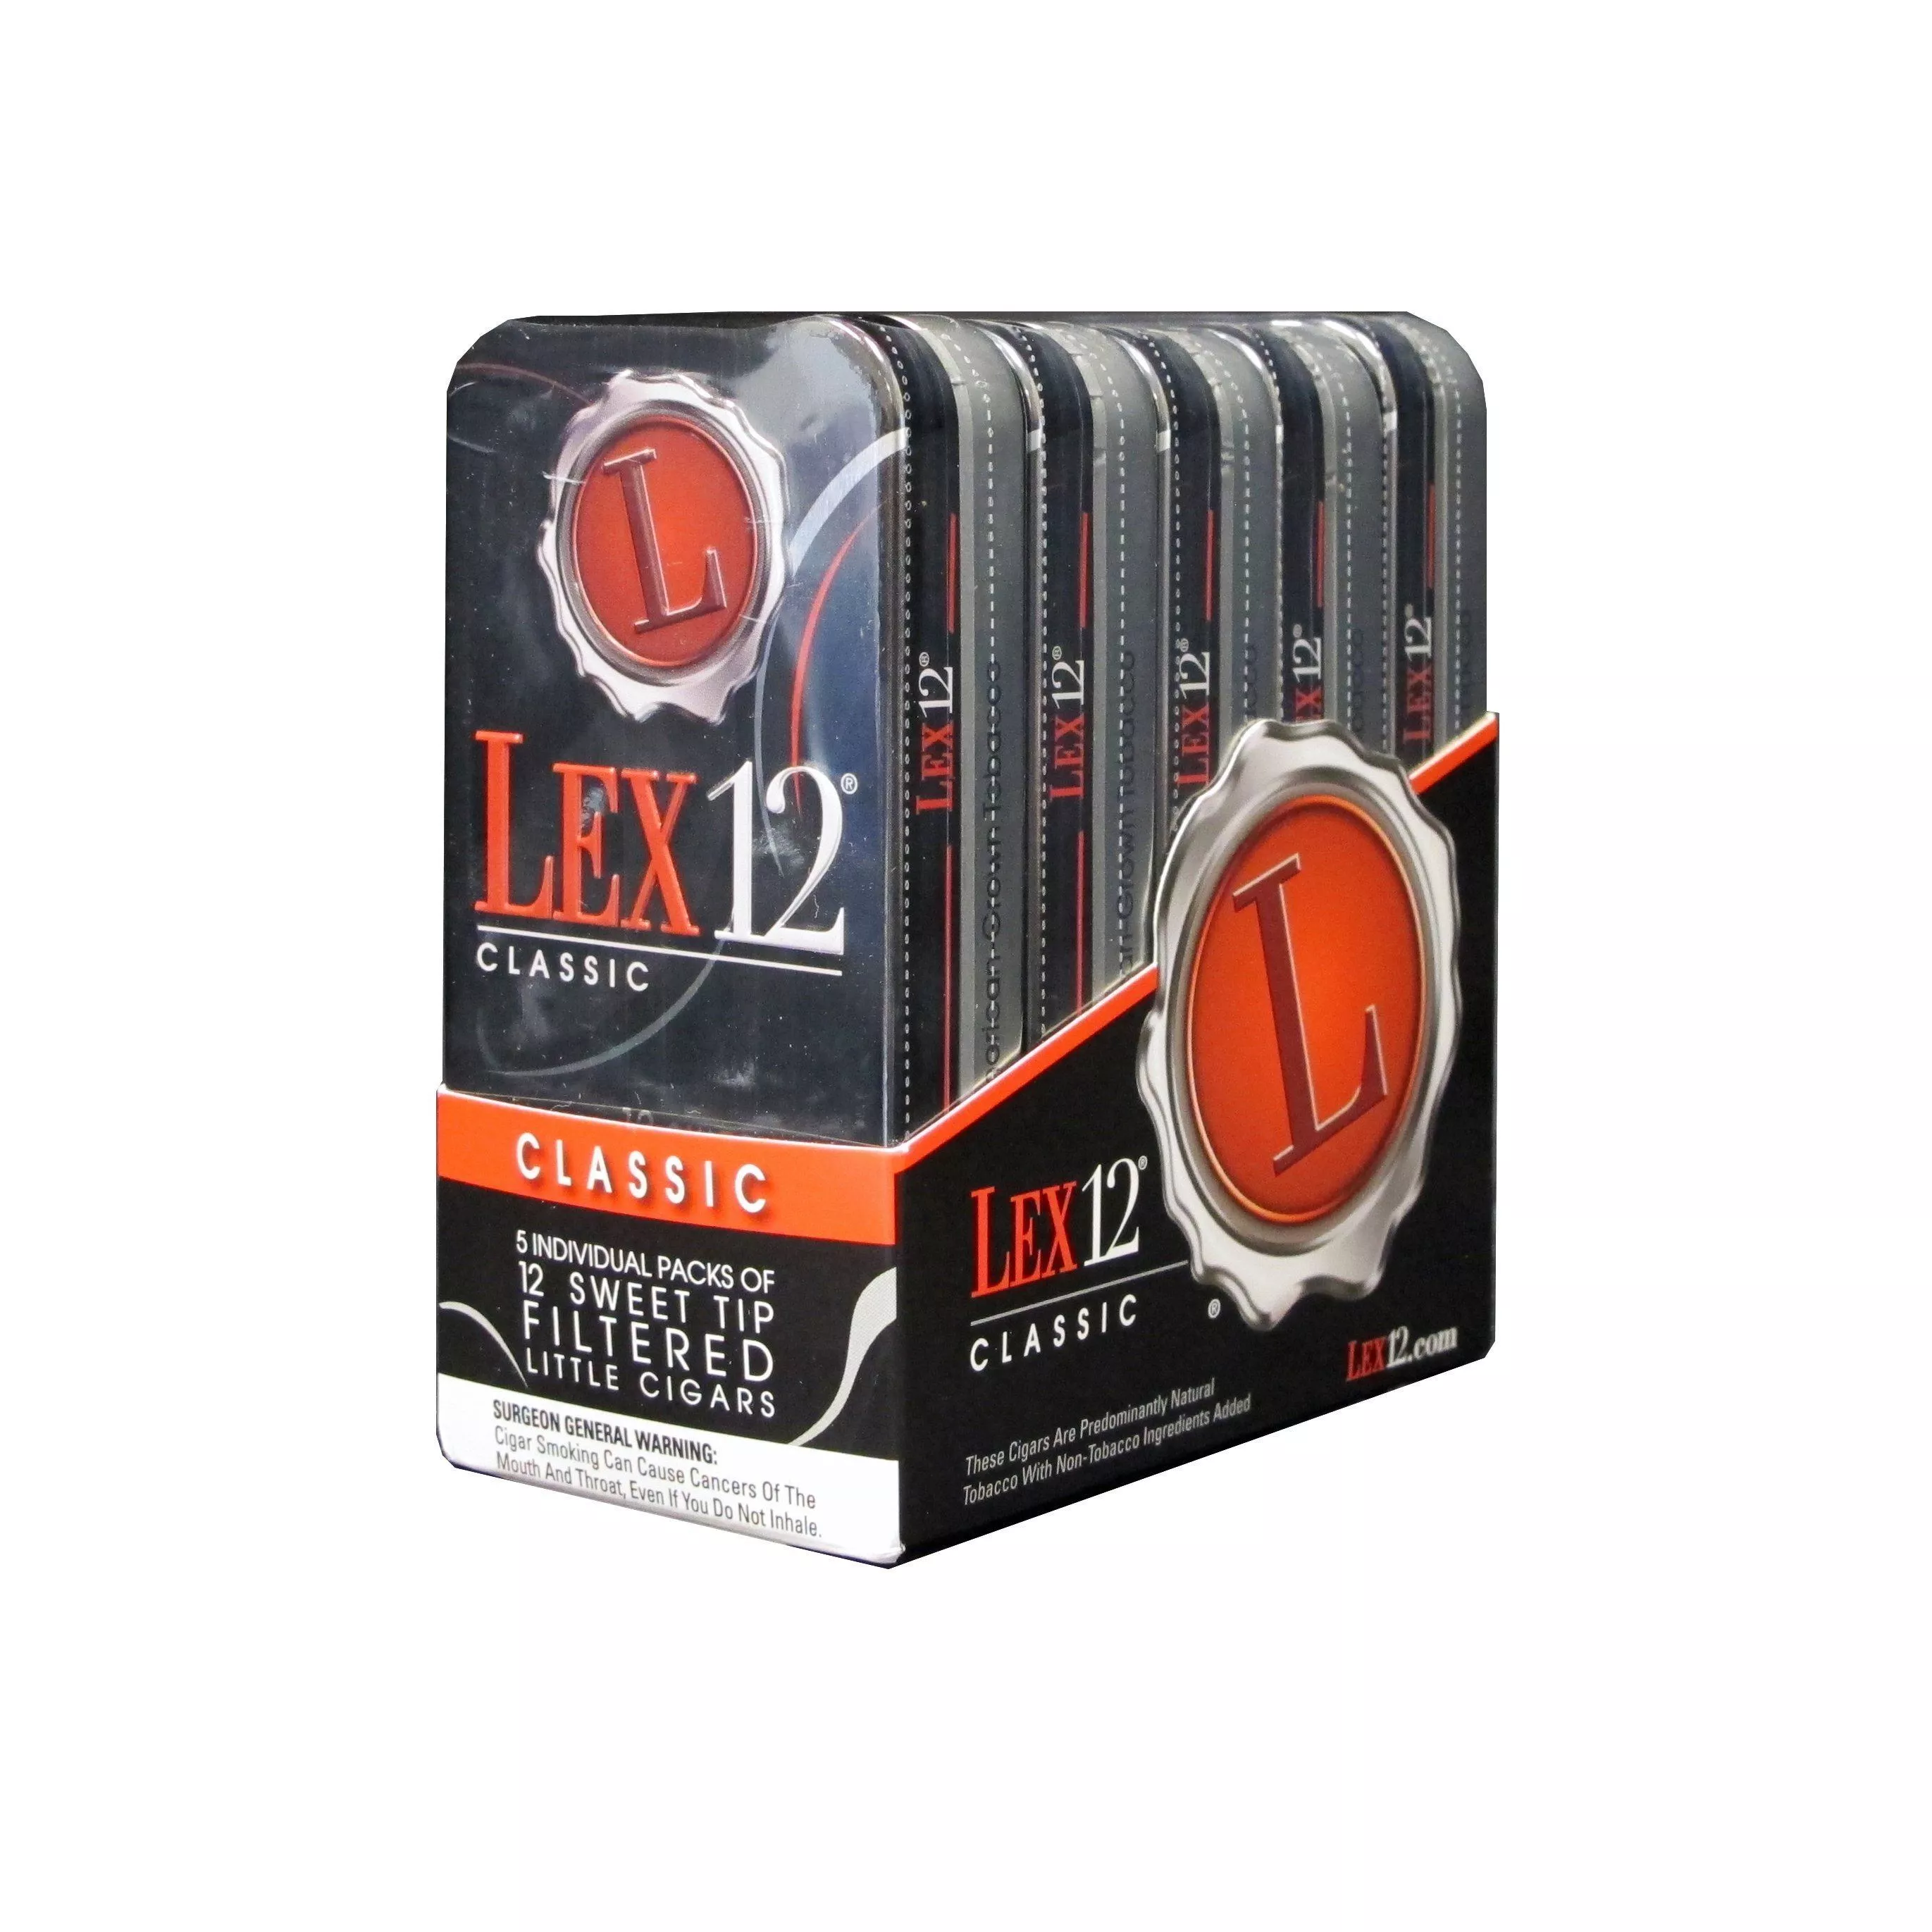 Lex12 little cigars are produced from the full-grown tobacco